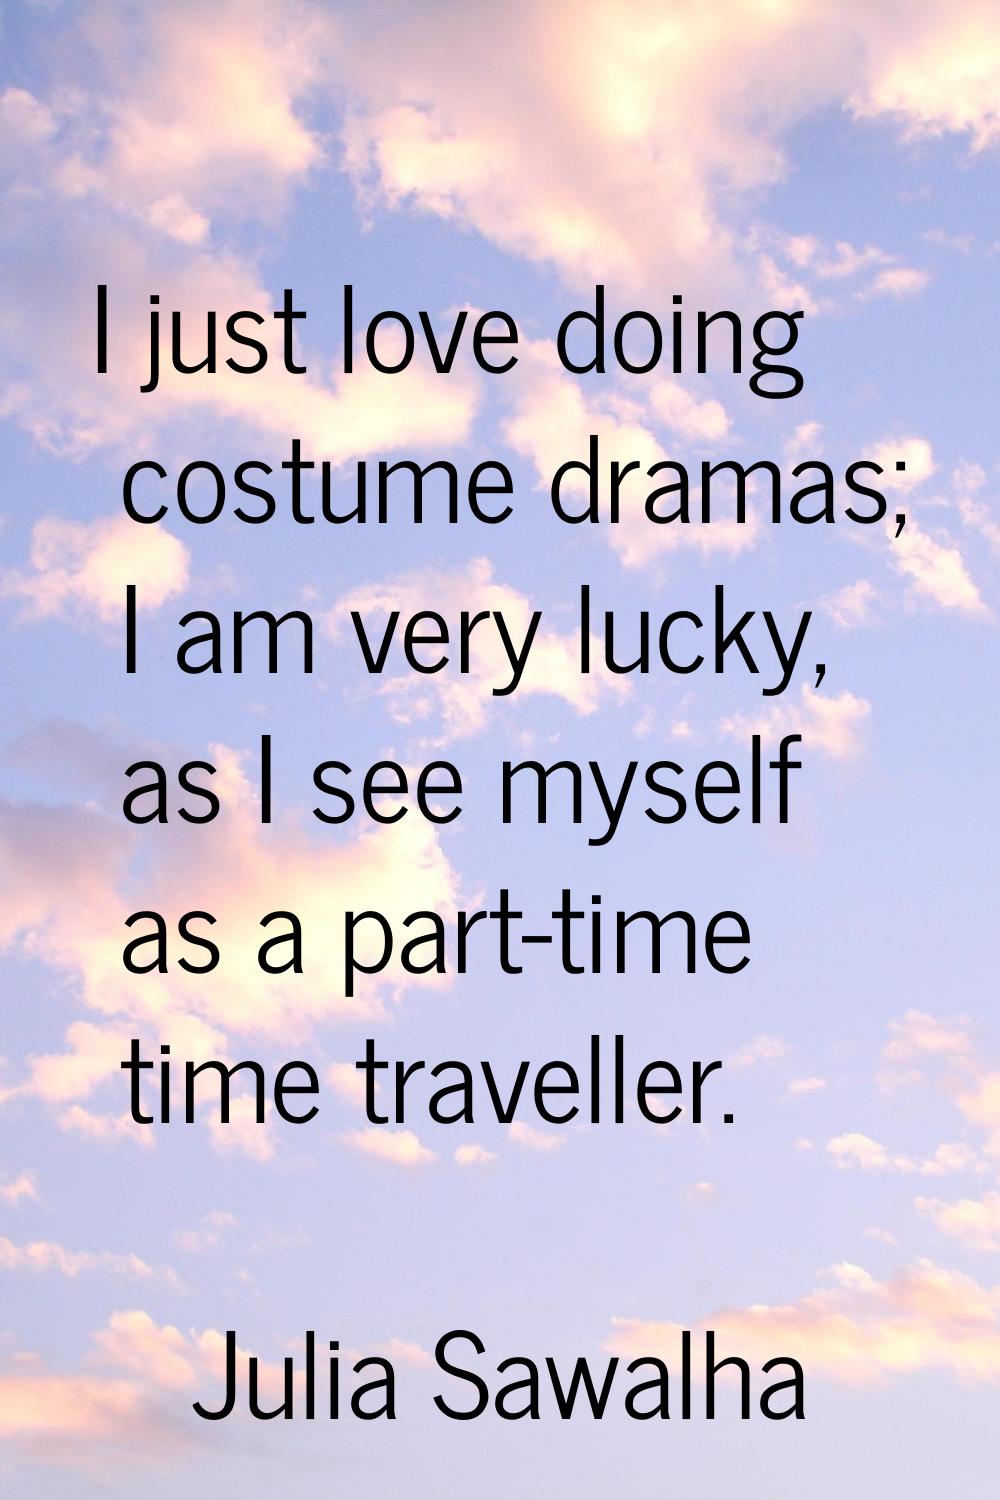 I just love doing costume dramas; I am very lucky, as I see myself as a part-time time traveller.